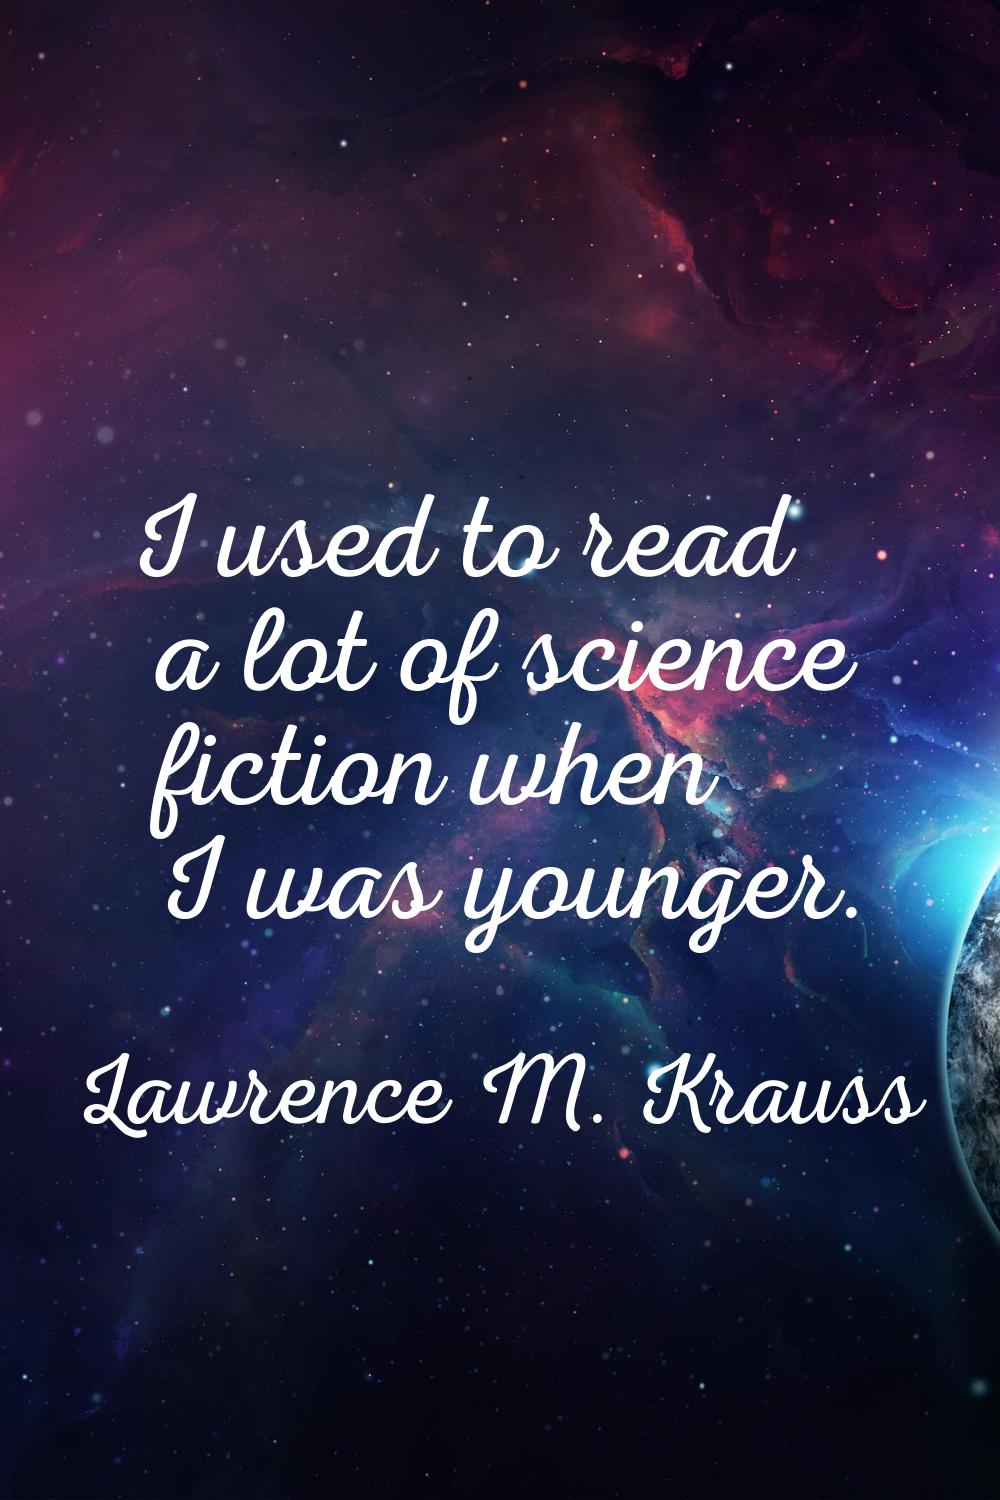 I used to read a lot of science fiction when I was younger.